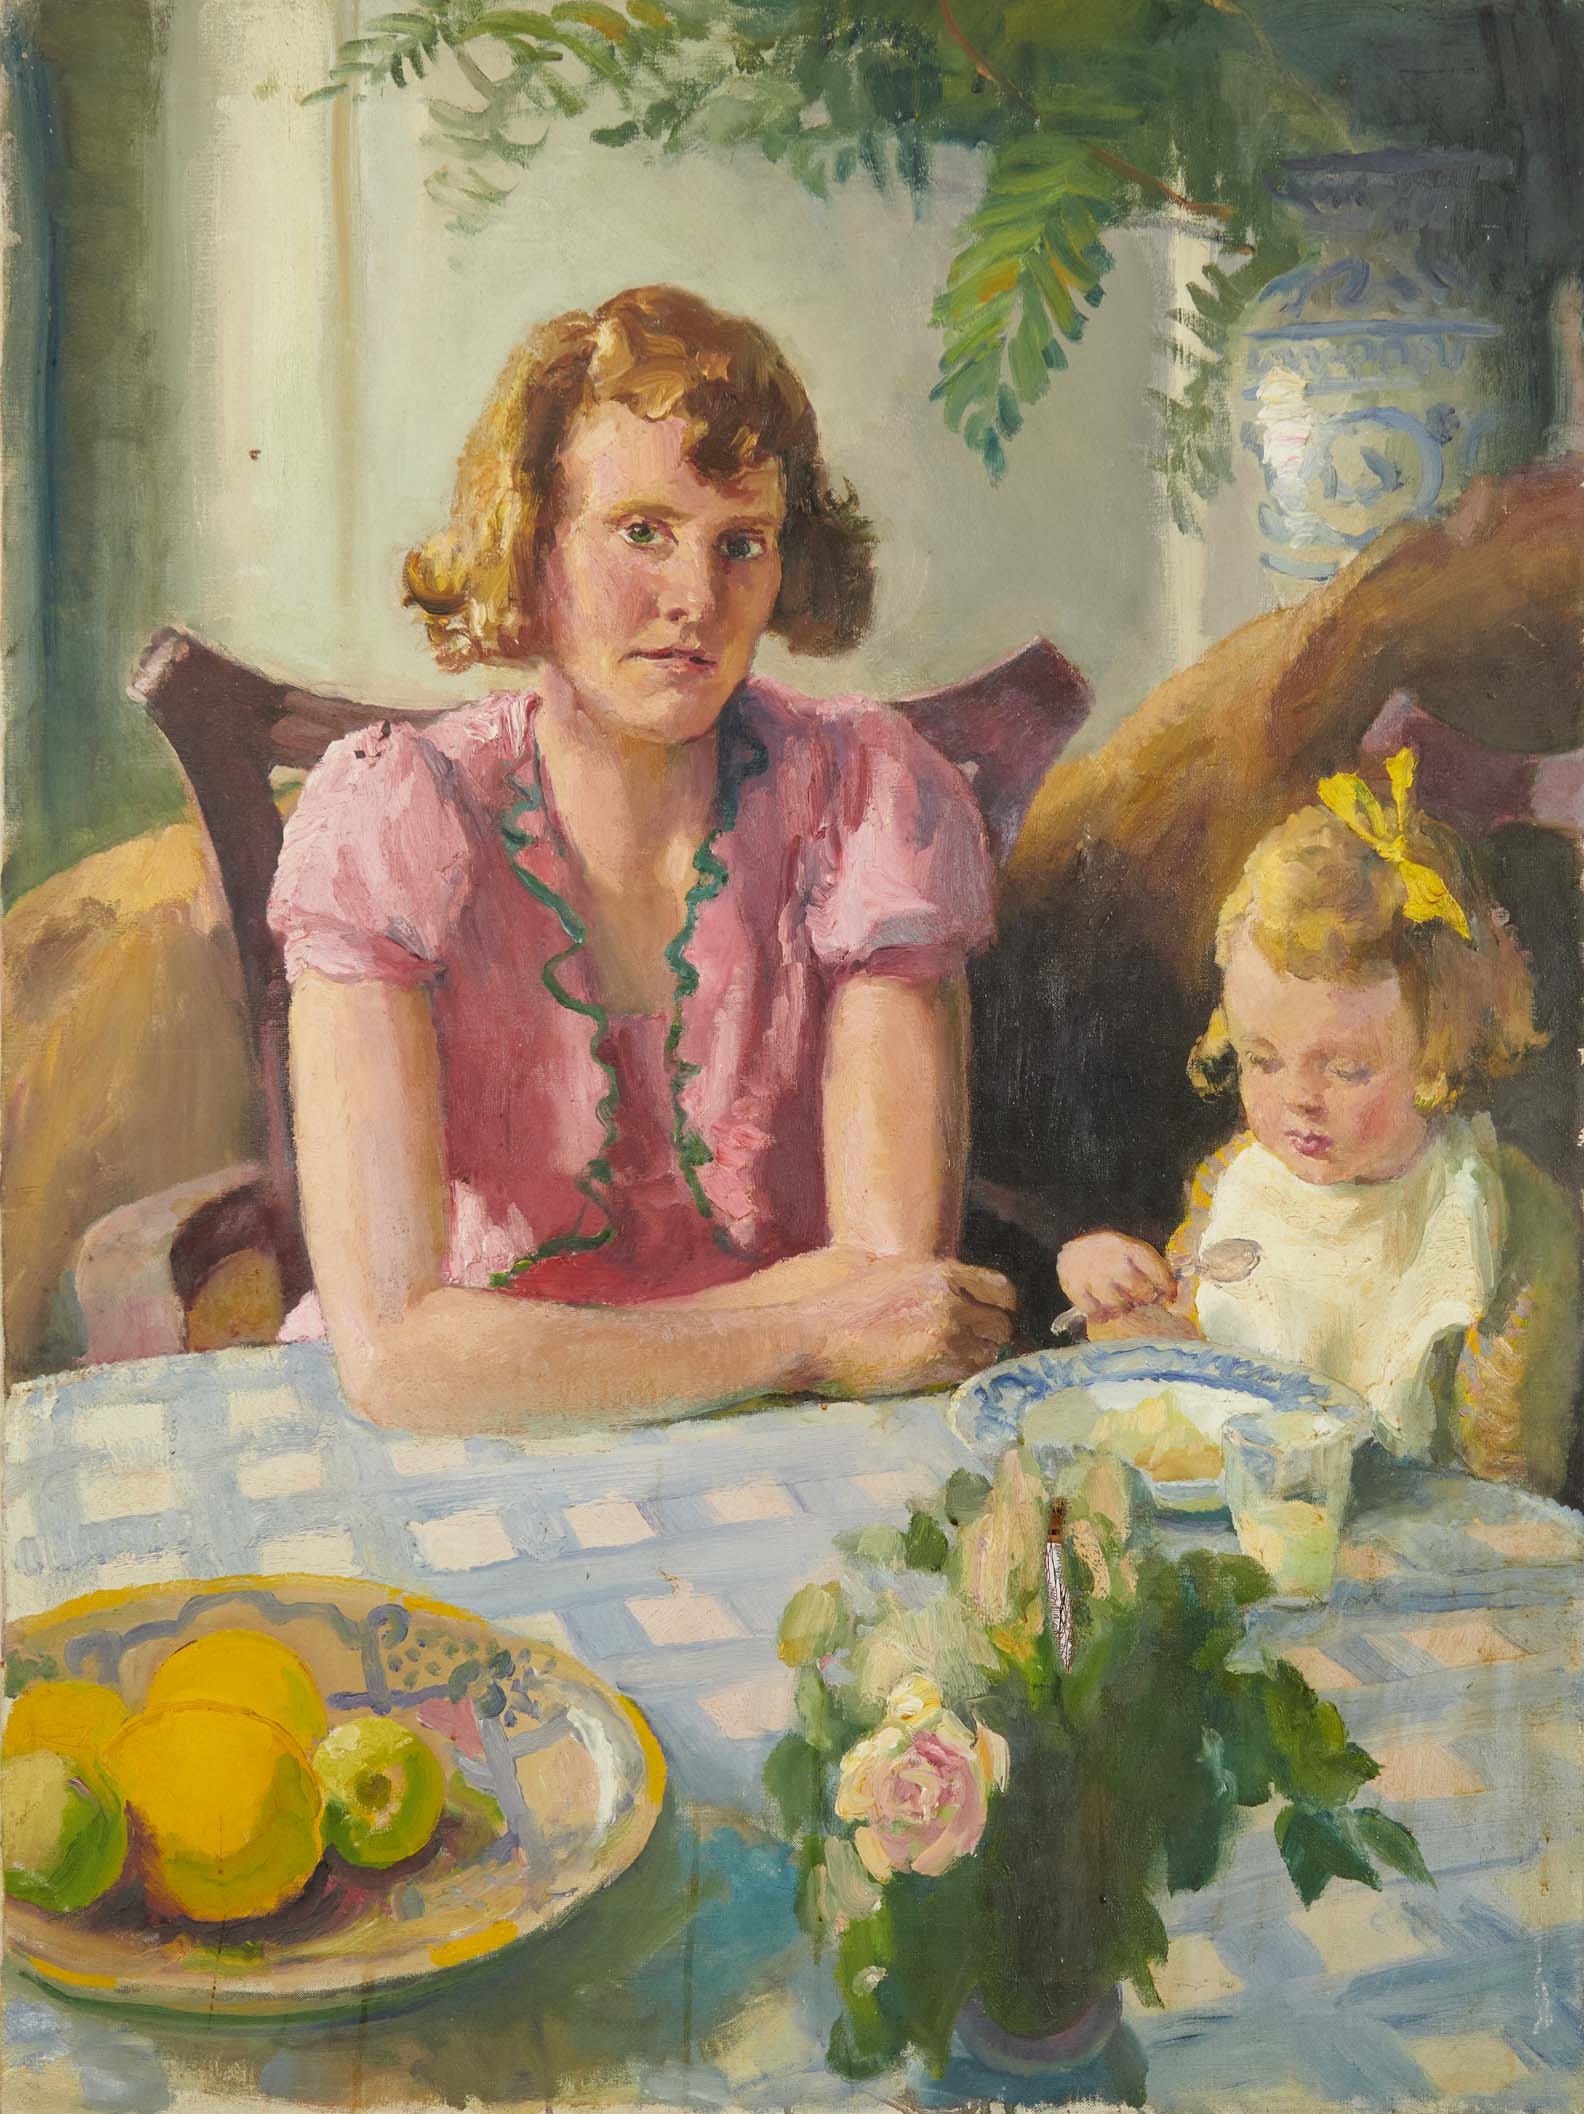 The artist's wife and daughter in an interior